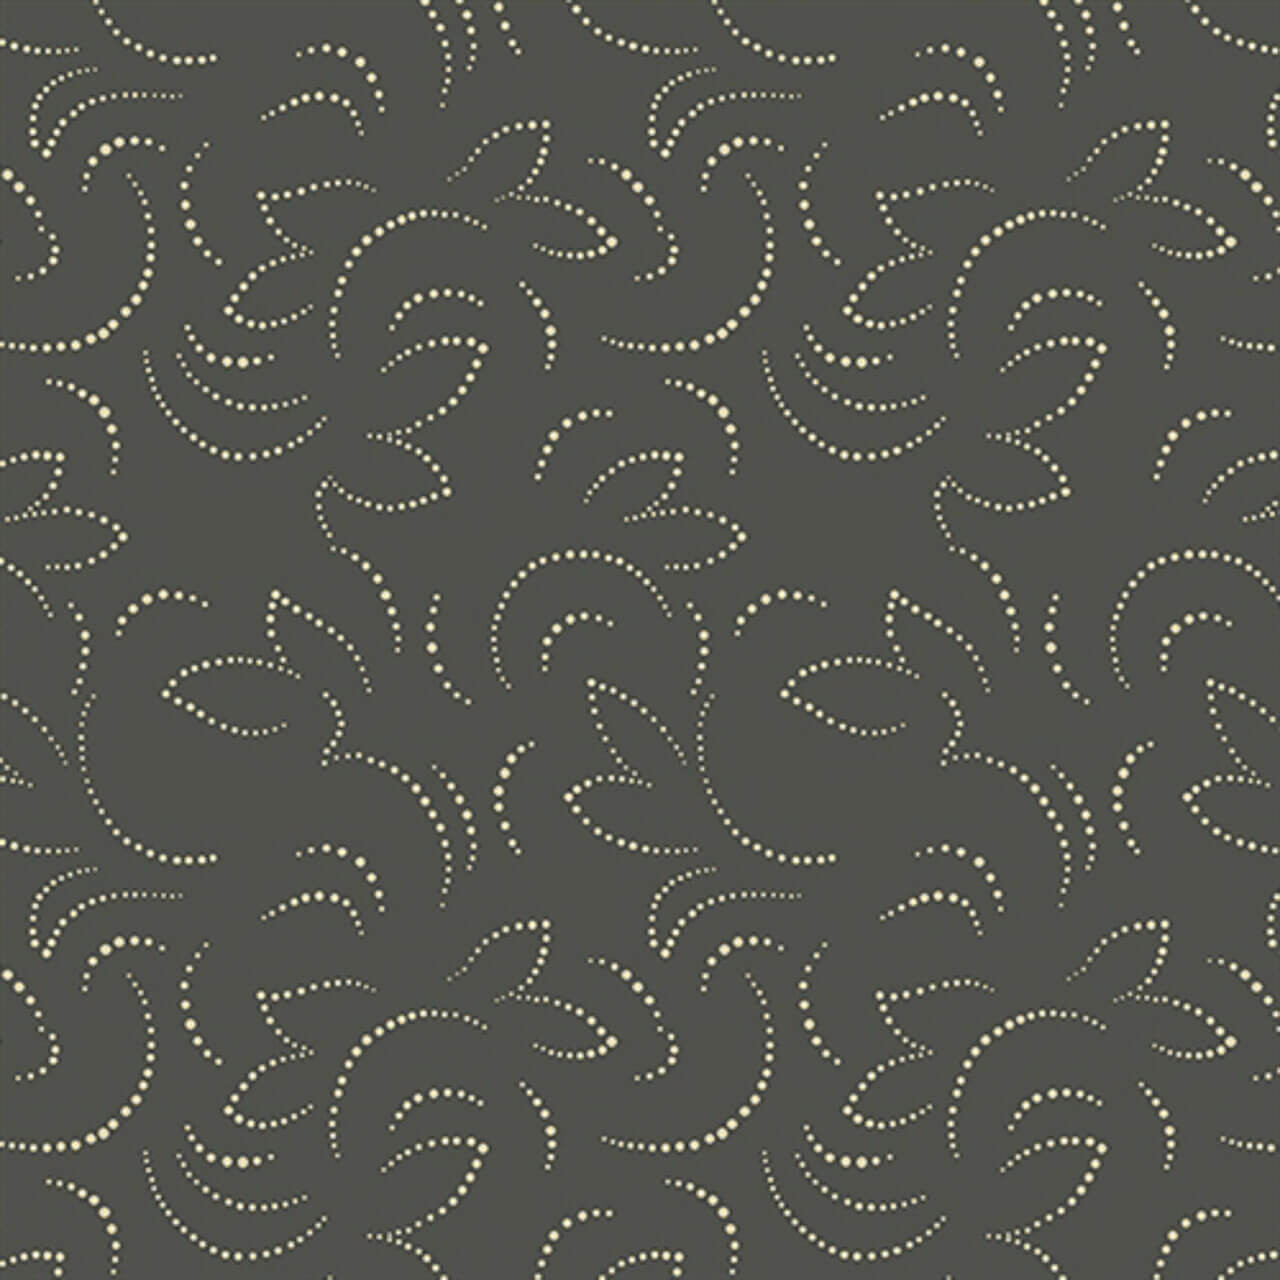 Andover's Flutter Charcoal fabric from the Veranda collection, showcasing dotted butterfly patterns on dark grey 100% cotton.